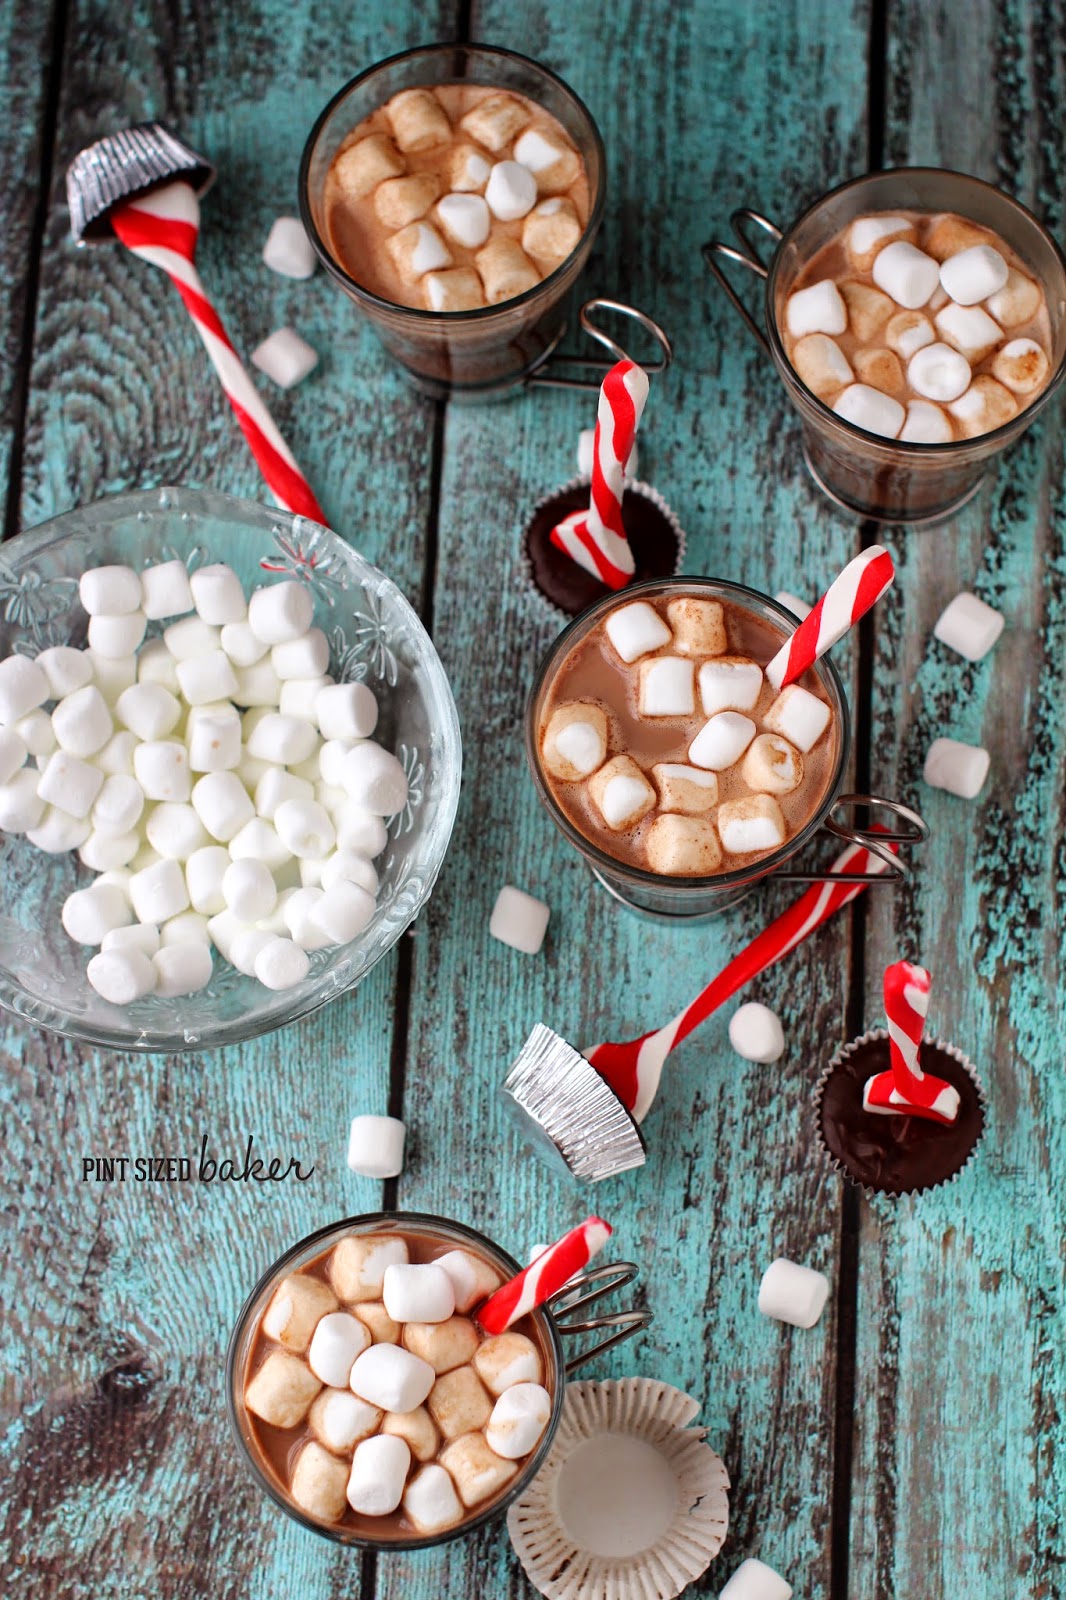 This Stove top Hot Chocolate with Peppermint Dippers taste delicious together! It'll become your favorite drink to come home to after a long day!